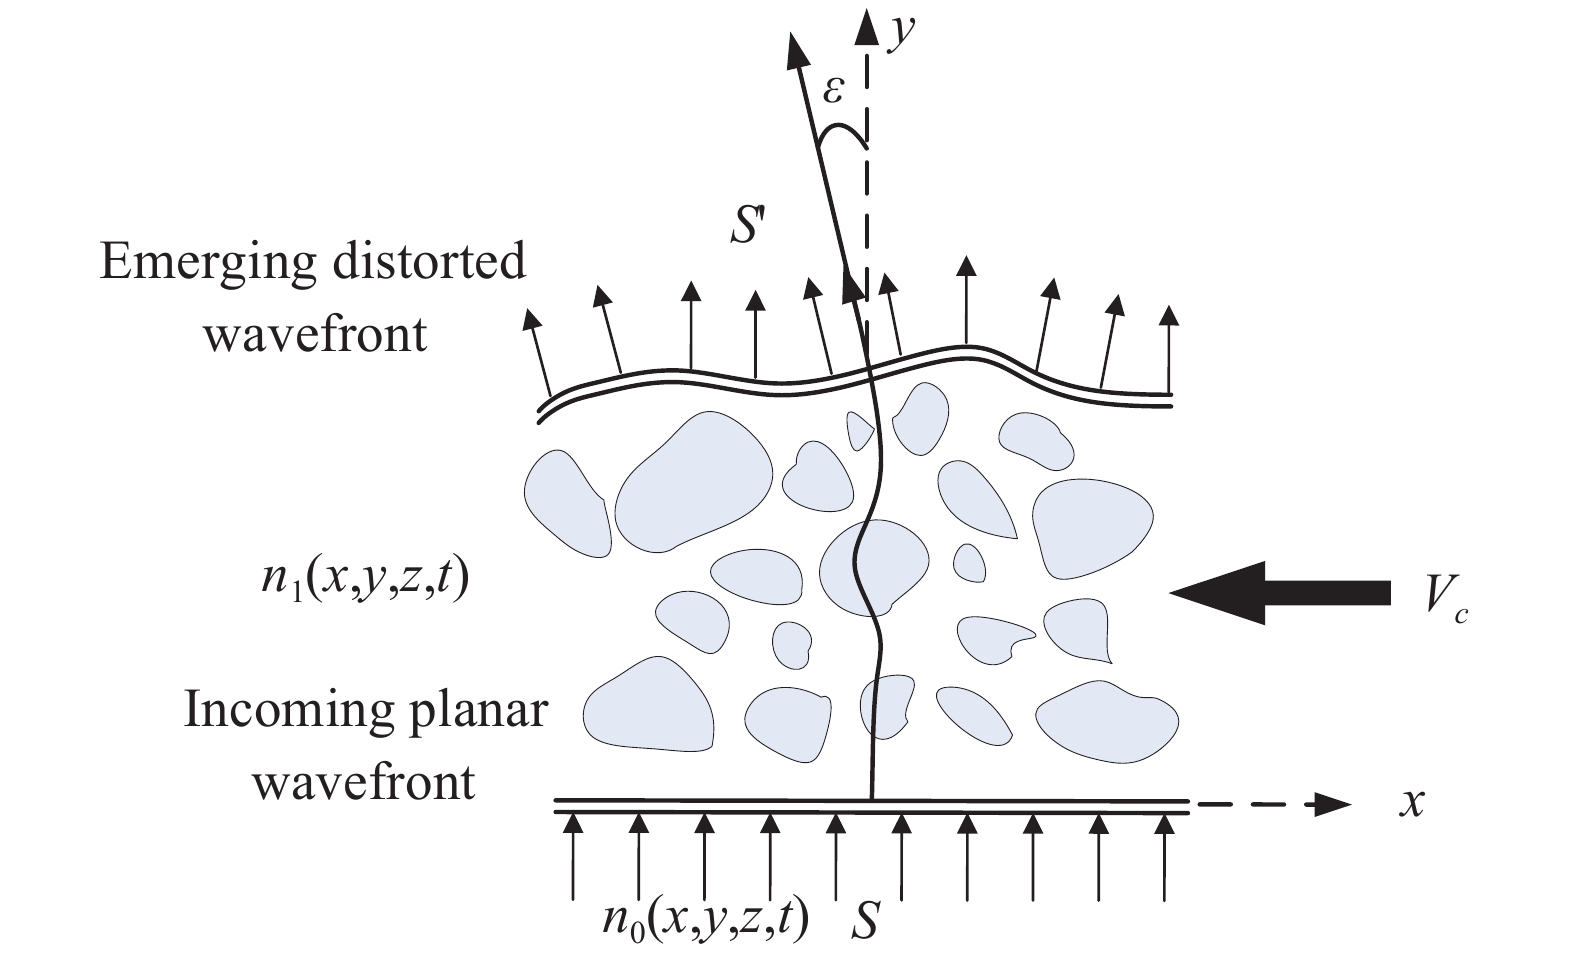 Schematic diagram of wavefront distortion generated by a plane wave passing through turbulent flow field